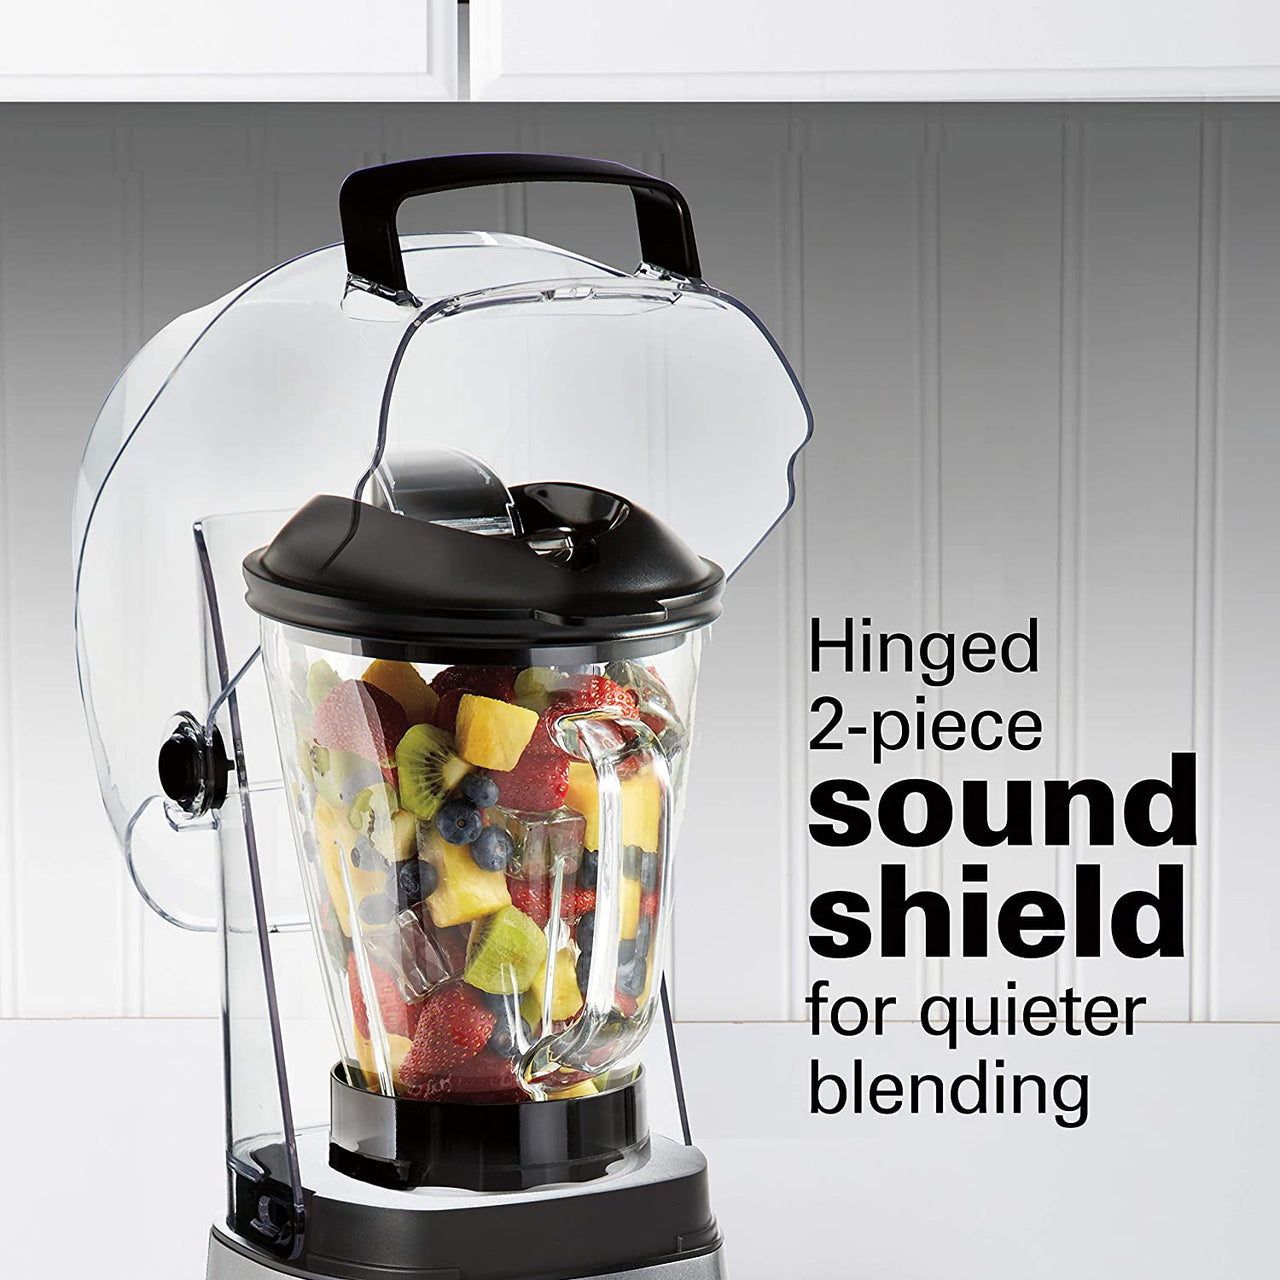 Hamilton Beach SoundShield 5-Speed Blender, 950 Watts, Ice Crush and Clean Programs, 52oz Glass + Portable Jars, Blends Food, Shakes and Smoothies (53602c)